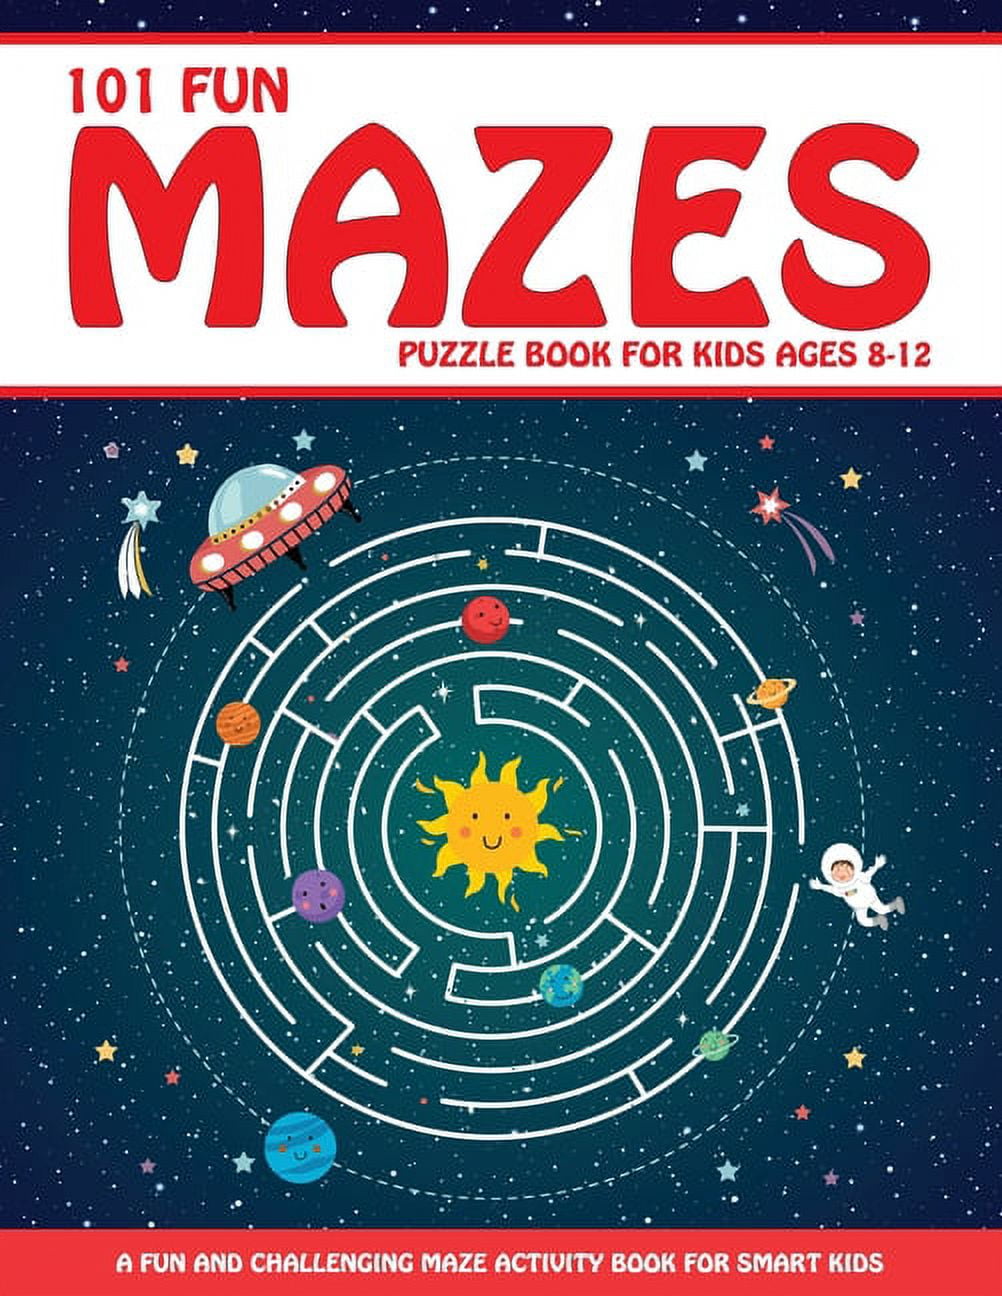  Enjoyable Mazes for Kids Ages 4-6 (Preschool and